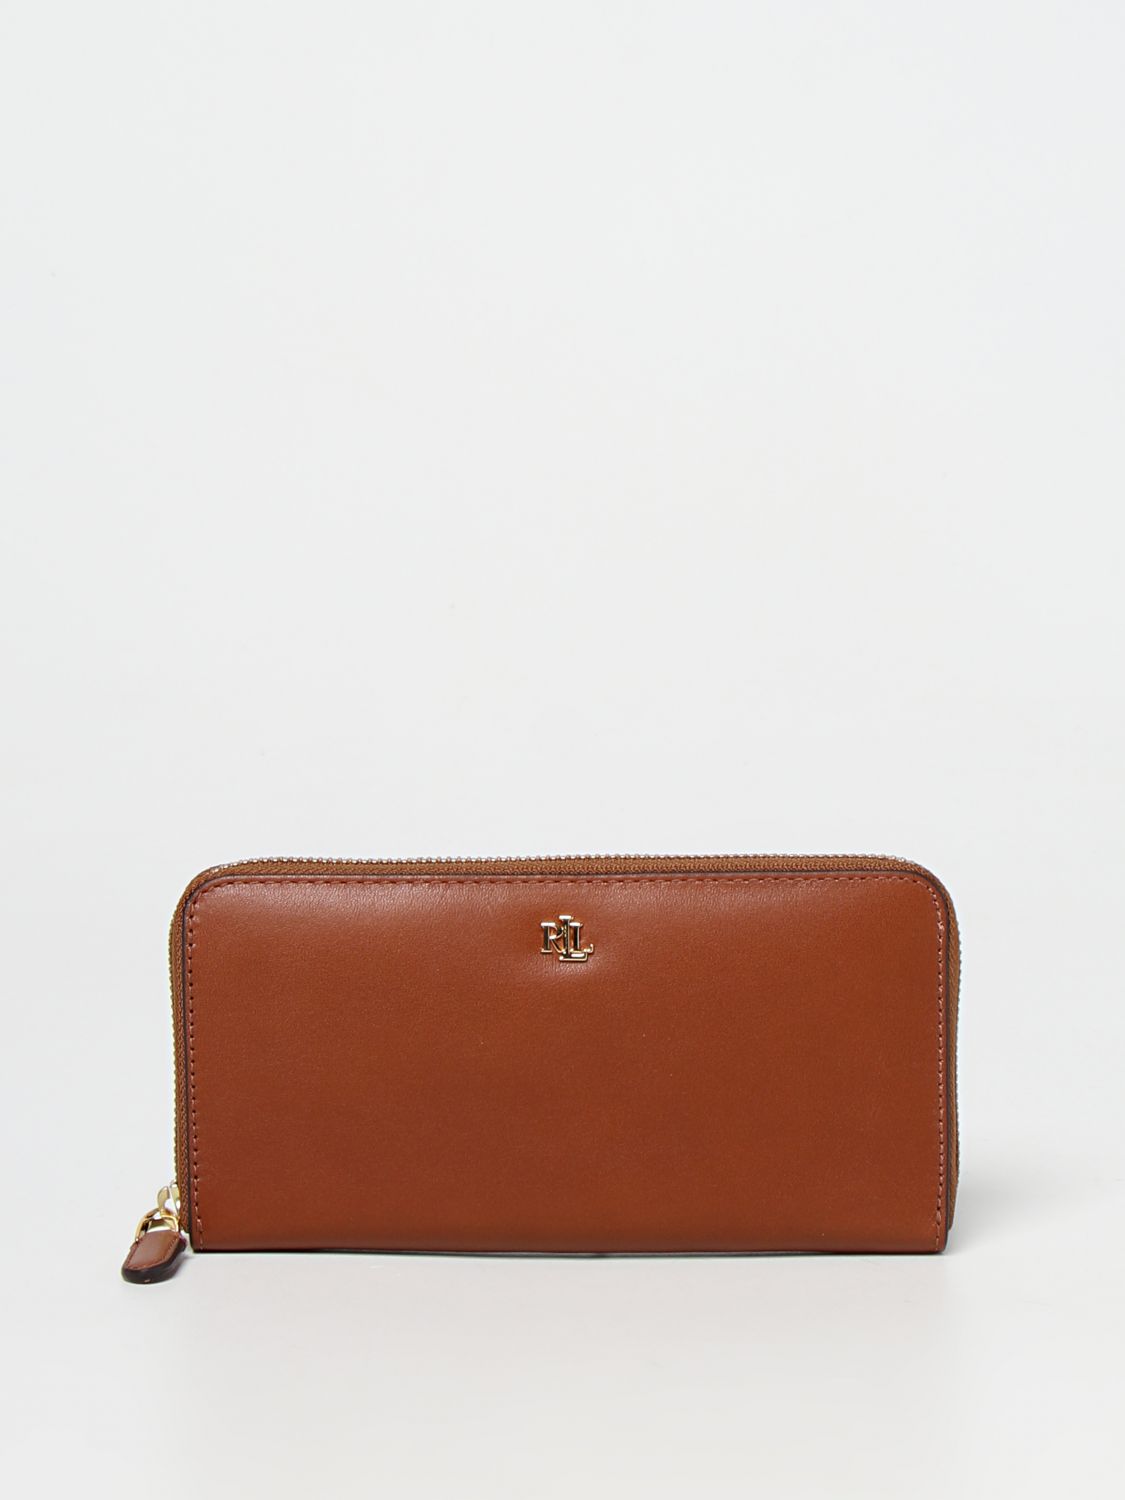 POLO RALPH LAUREN: wallet for woman - Leather | Polo Ralph Lauren wallet  432876730 online on 